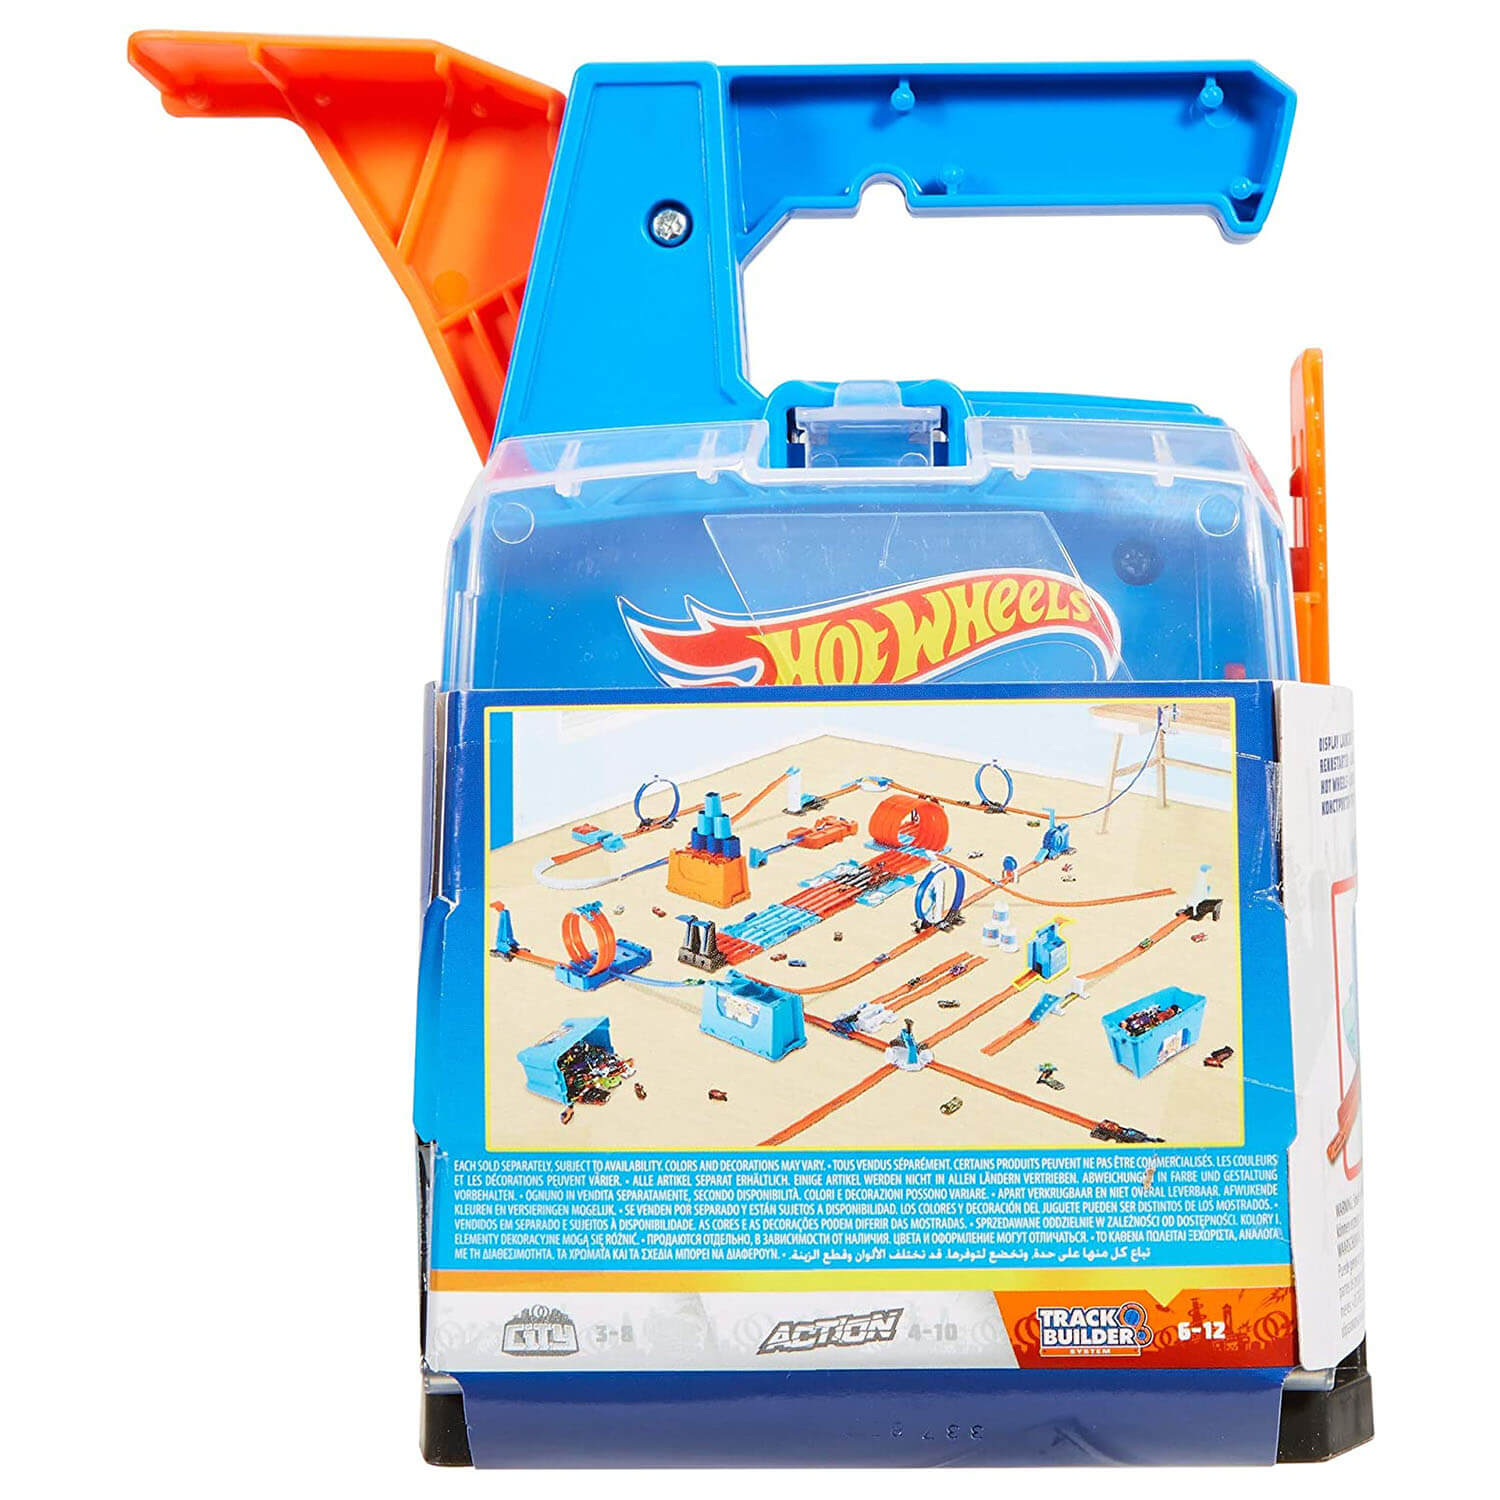 Back view of the Hot Wheels Display Launcher Case package.